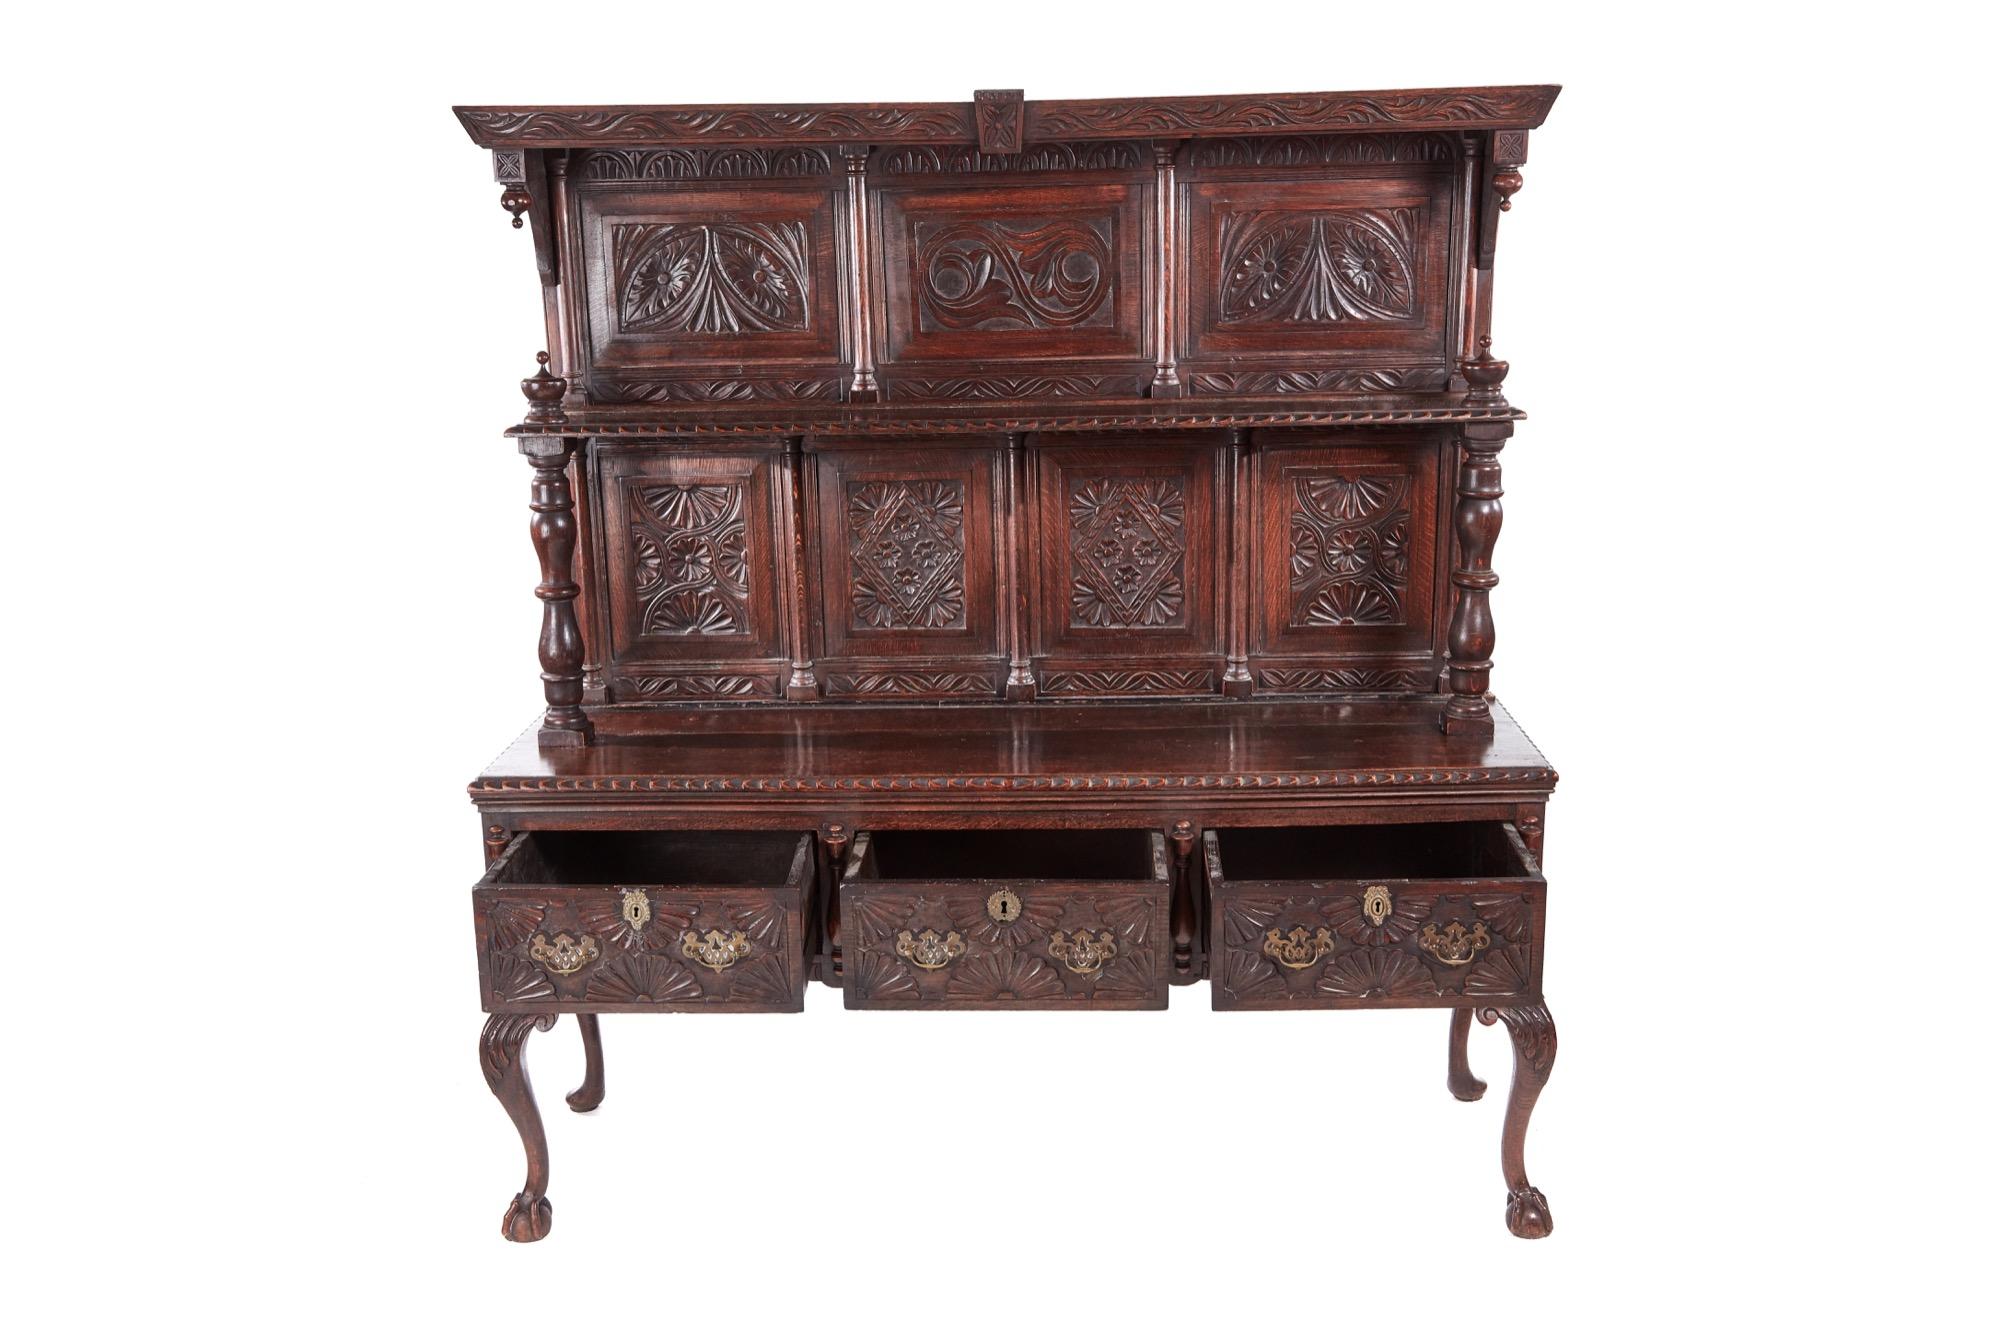 Fantastic antique carved oak dresser. The top section having seven beautifully designed hand carved panels, one shelf supported by two elegant turned columns. The base boasts three long carved drawers with original brass handles. It stands on lovely